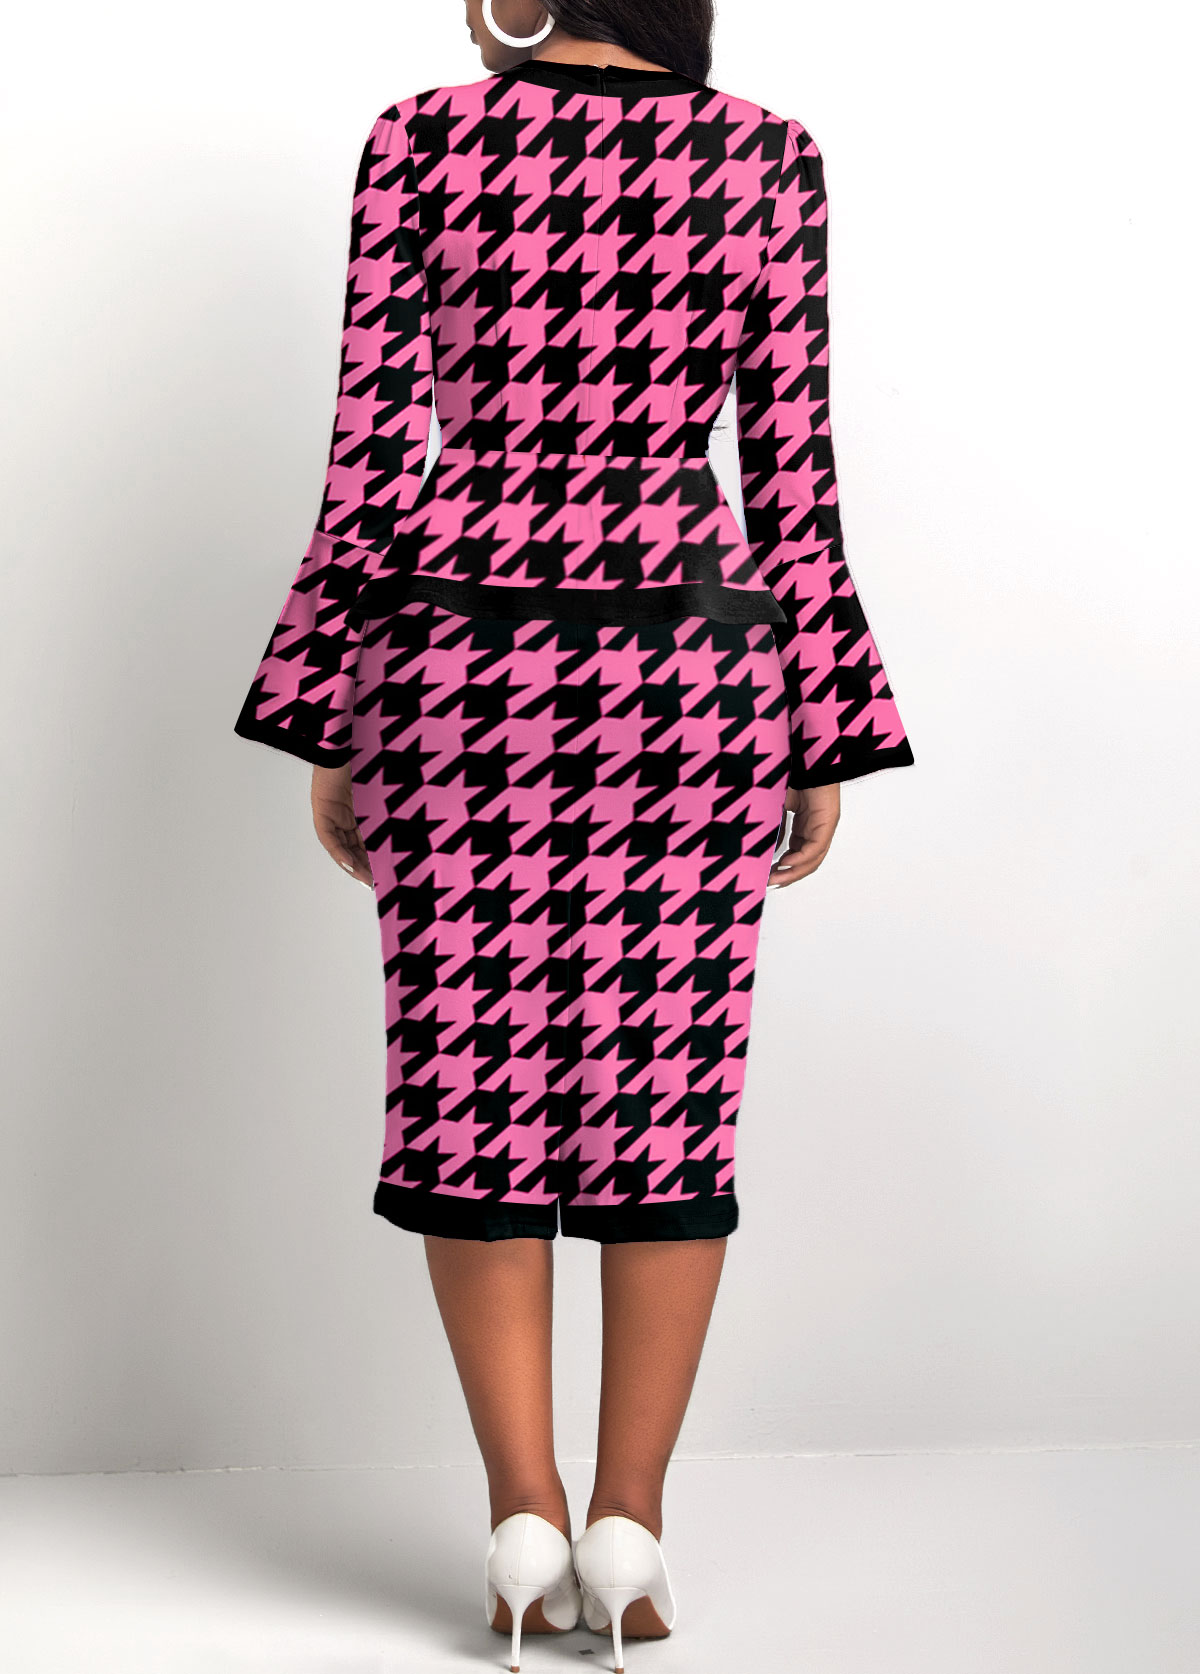 Houndstooth Print Two Piece Hot Pink Top and Skirt